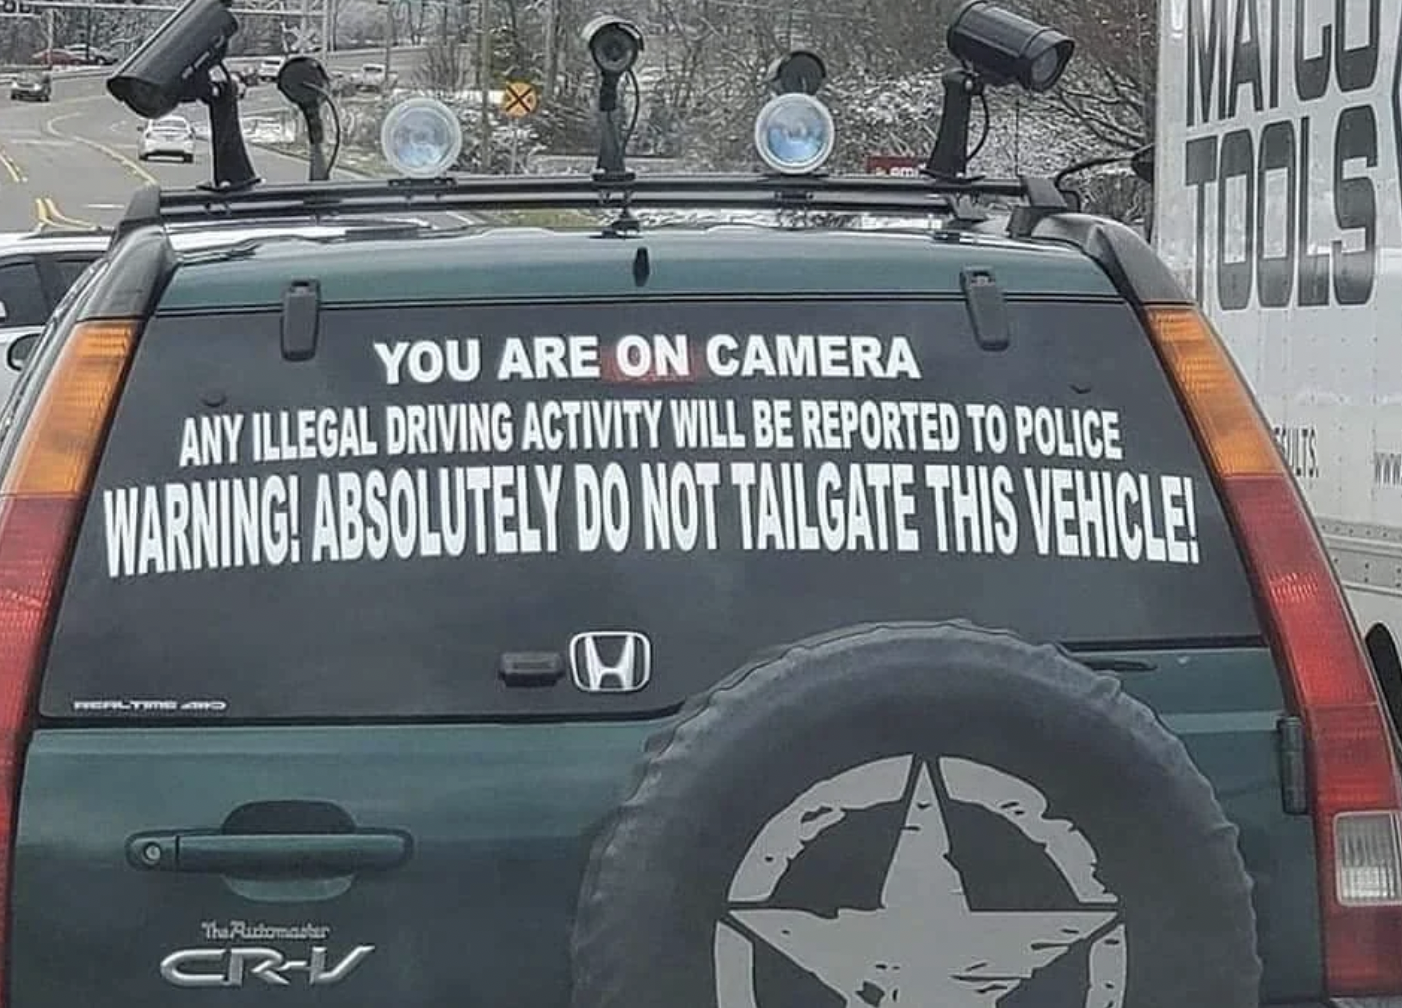 karen driving meme - You Are On Camera Any Illegal Driving Activity Will Be Reported To Police Warning! Absolutely Do Not Tailgate This Vehicle! mo The Rushonaster CrV H